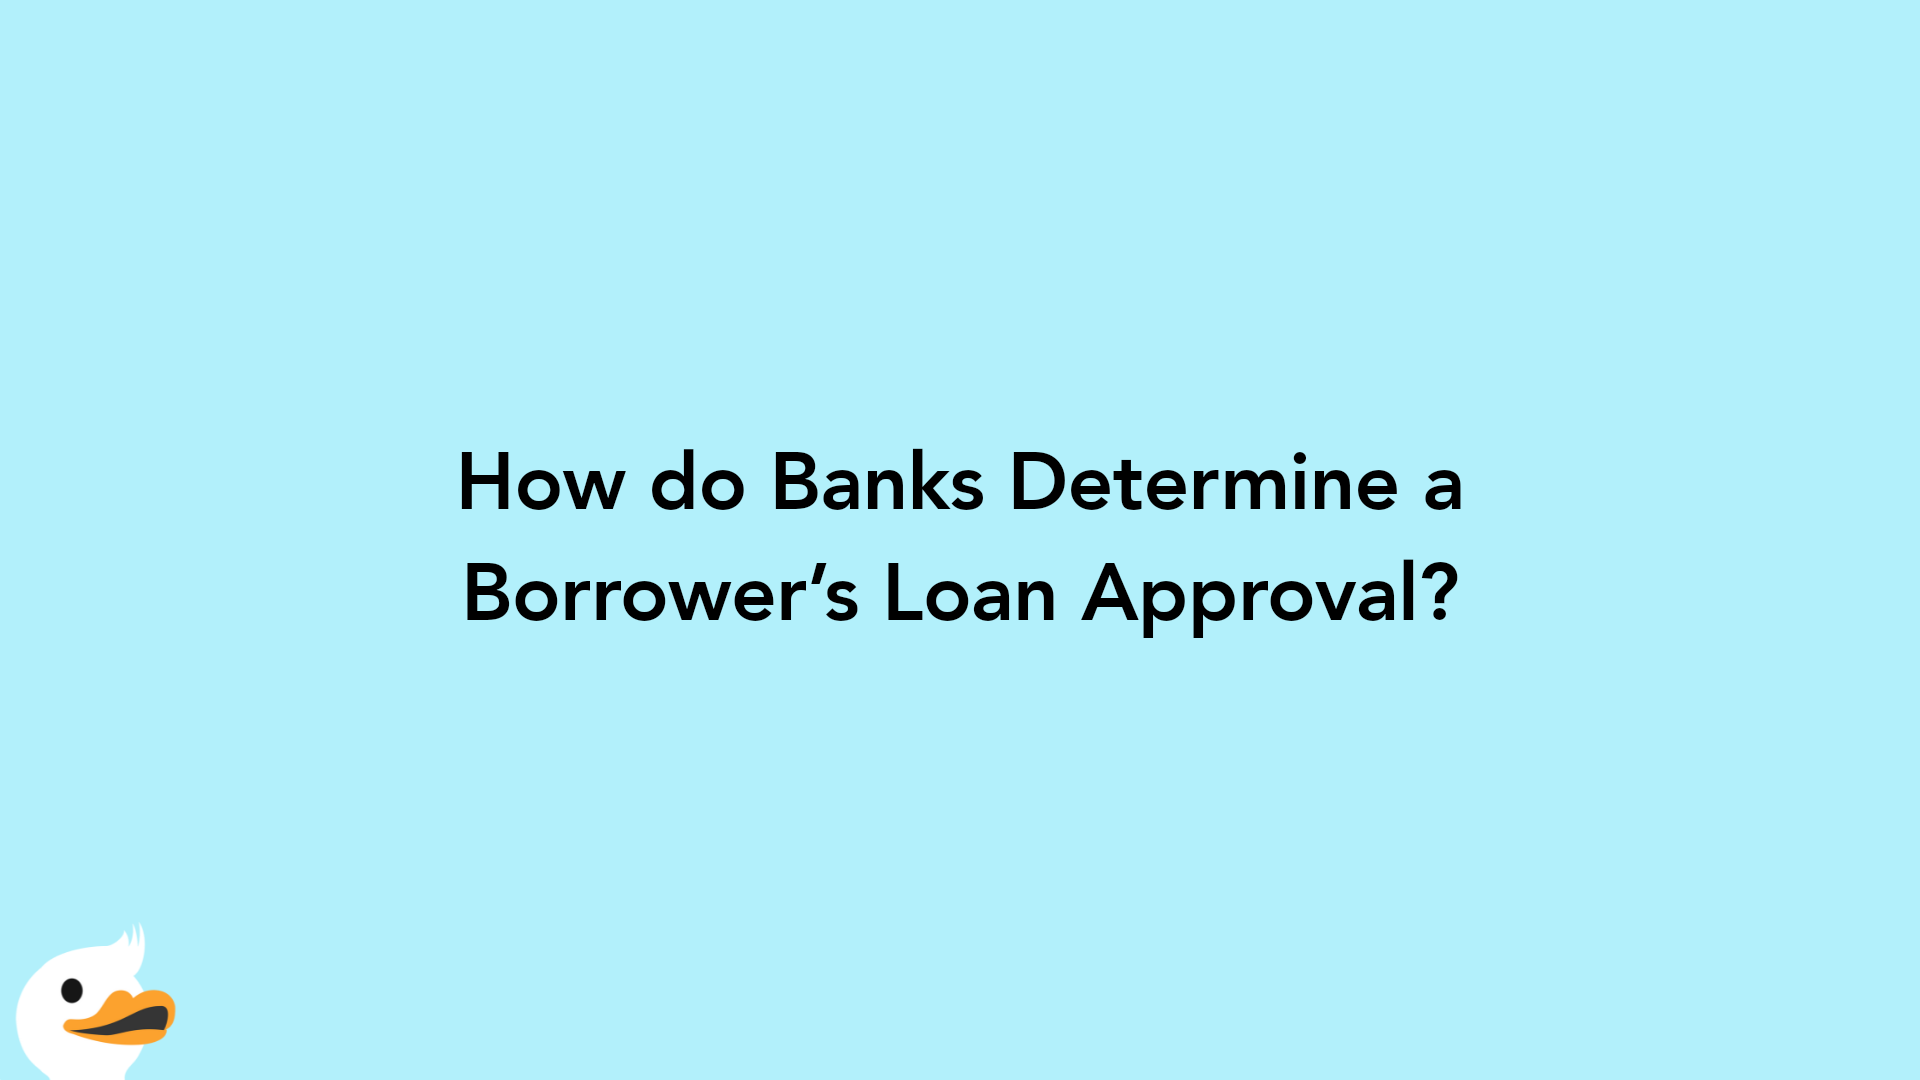 How do Banks Determine a Borrower’s Loan Approval?